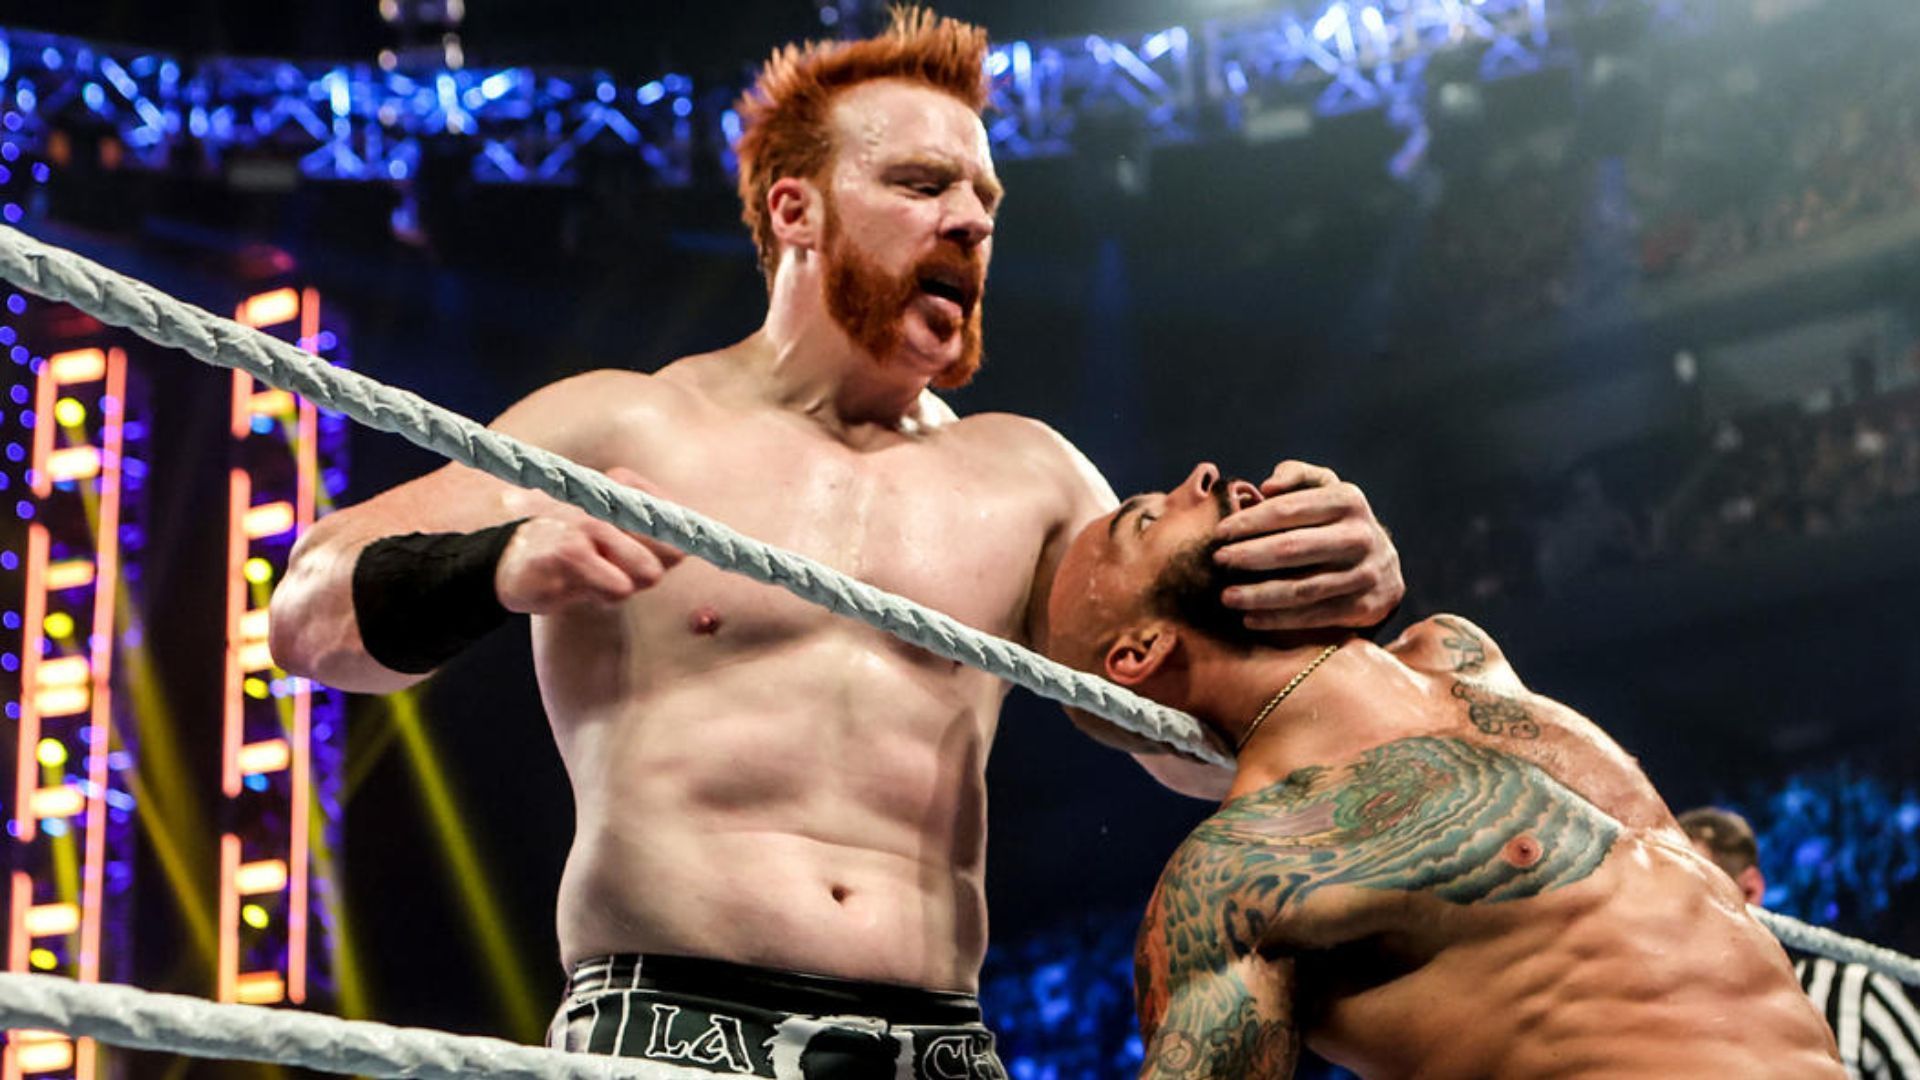 Sheamus hitting Ricochet with 10 Beats of the Bodhran on WWE SmackDown